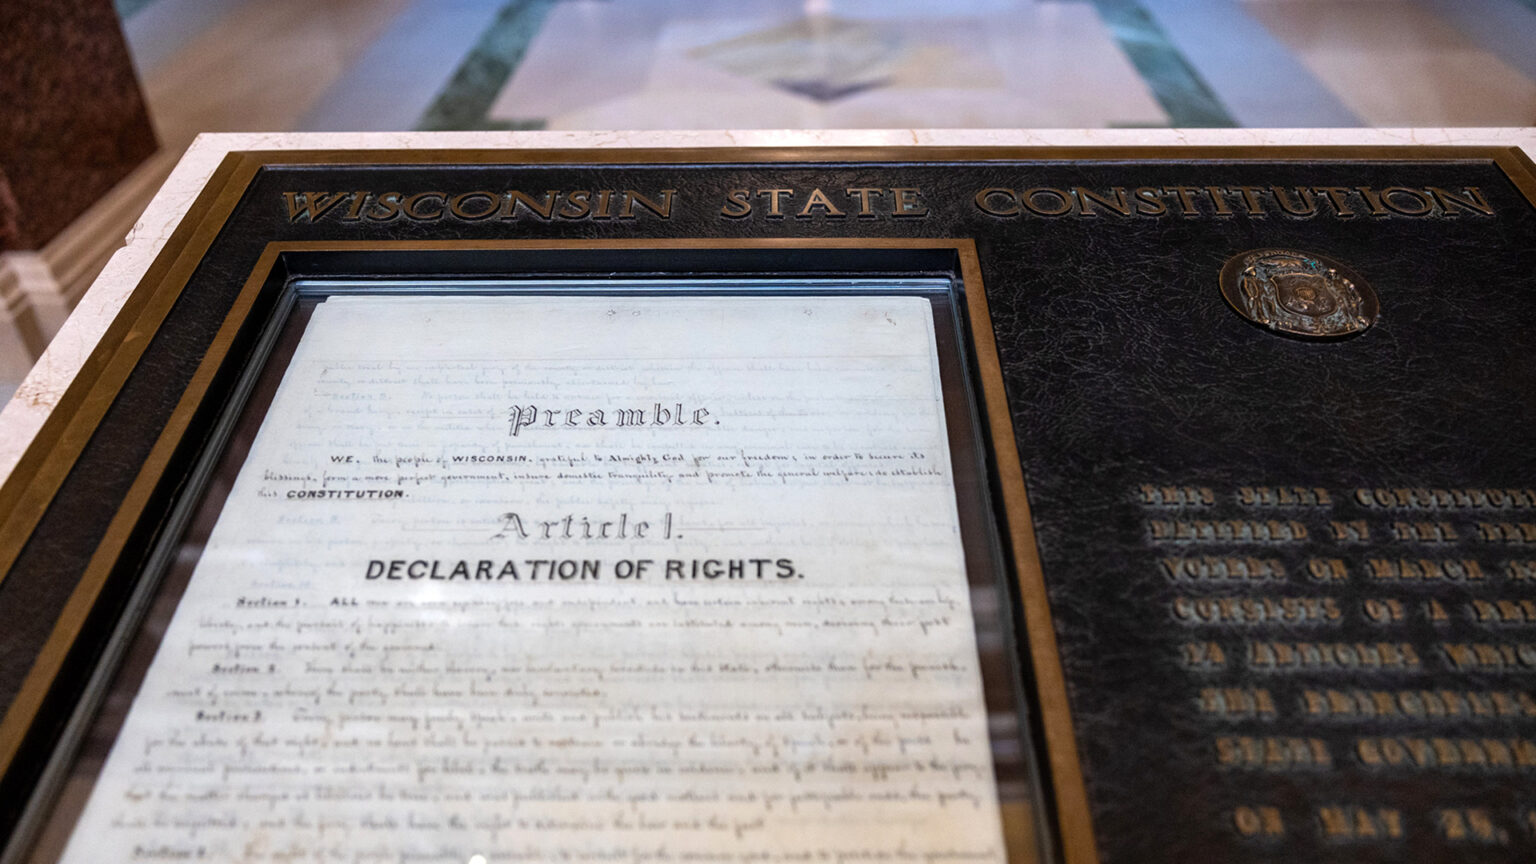 A historical display shows a bronze plaque with the title Wisconsin State Constitution and a glass-covered set of papers with header copy on the top reading Preamble and Article I. Declaration of Rights, with an out-of-focus marble floor in the background.